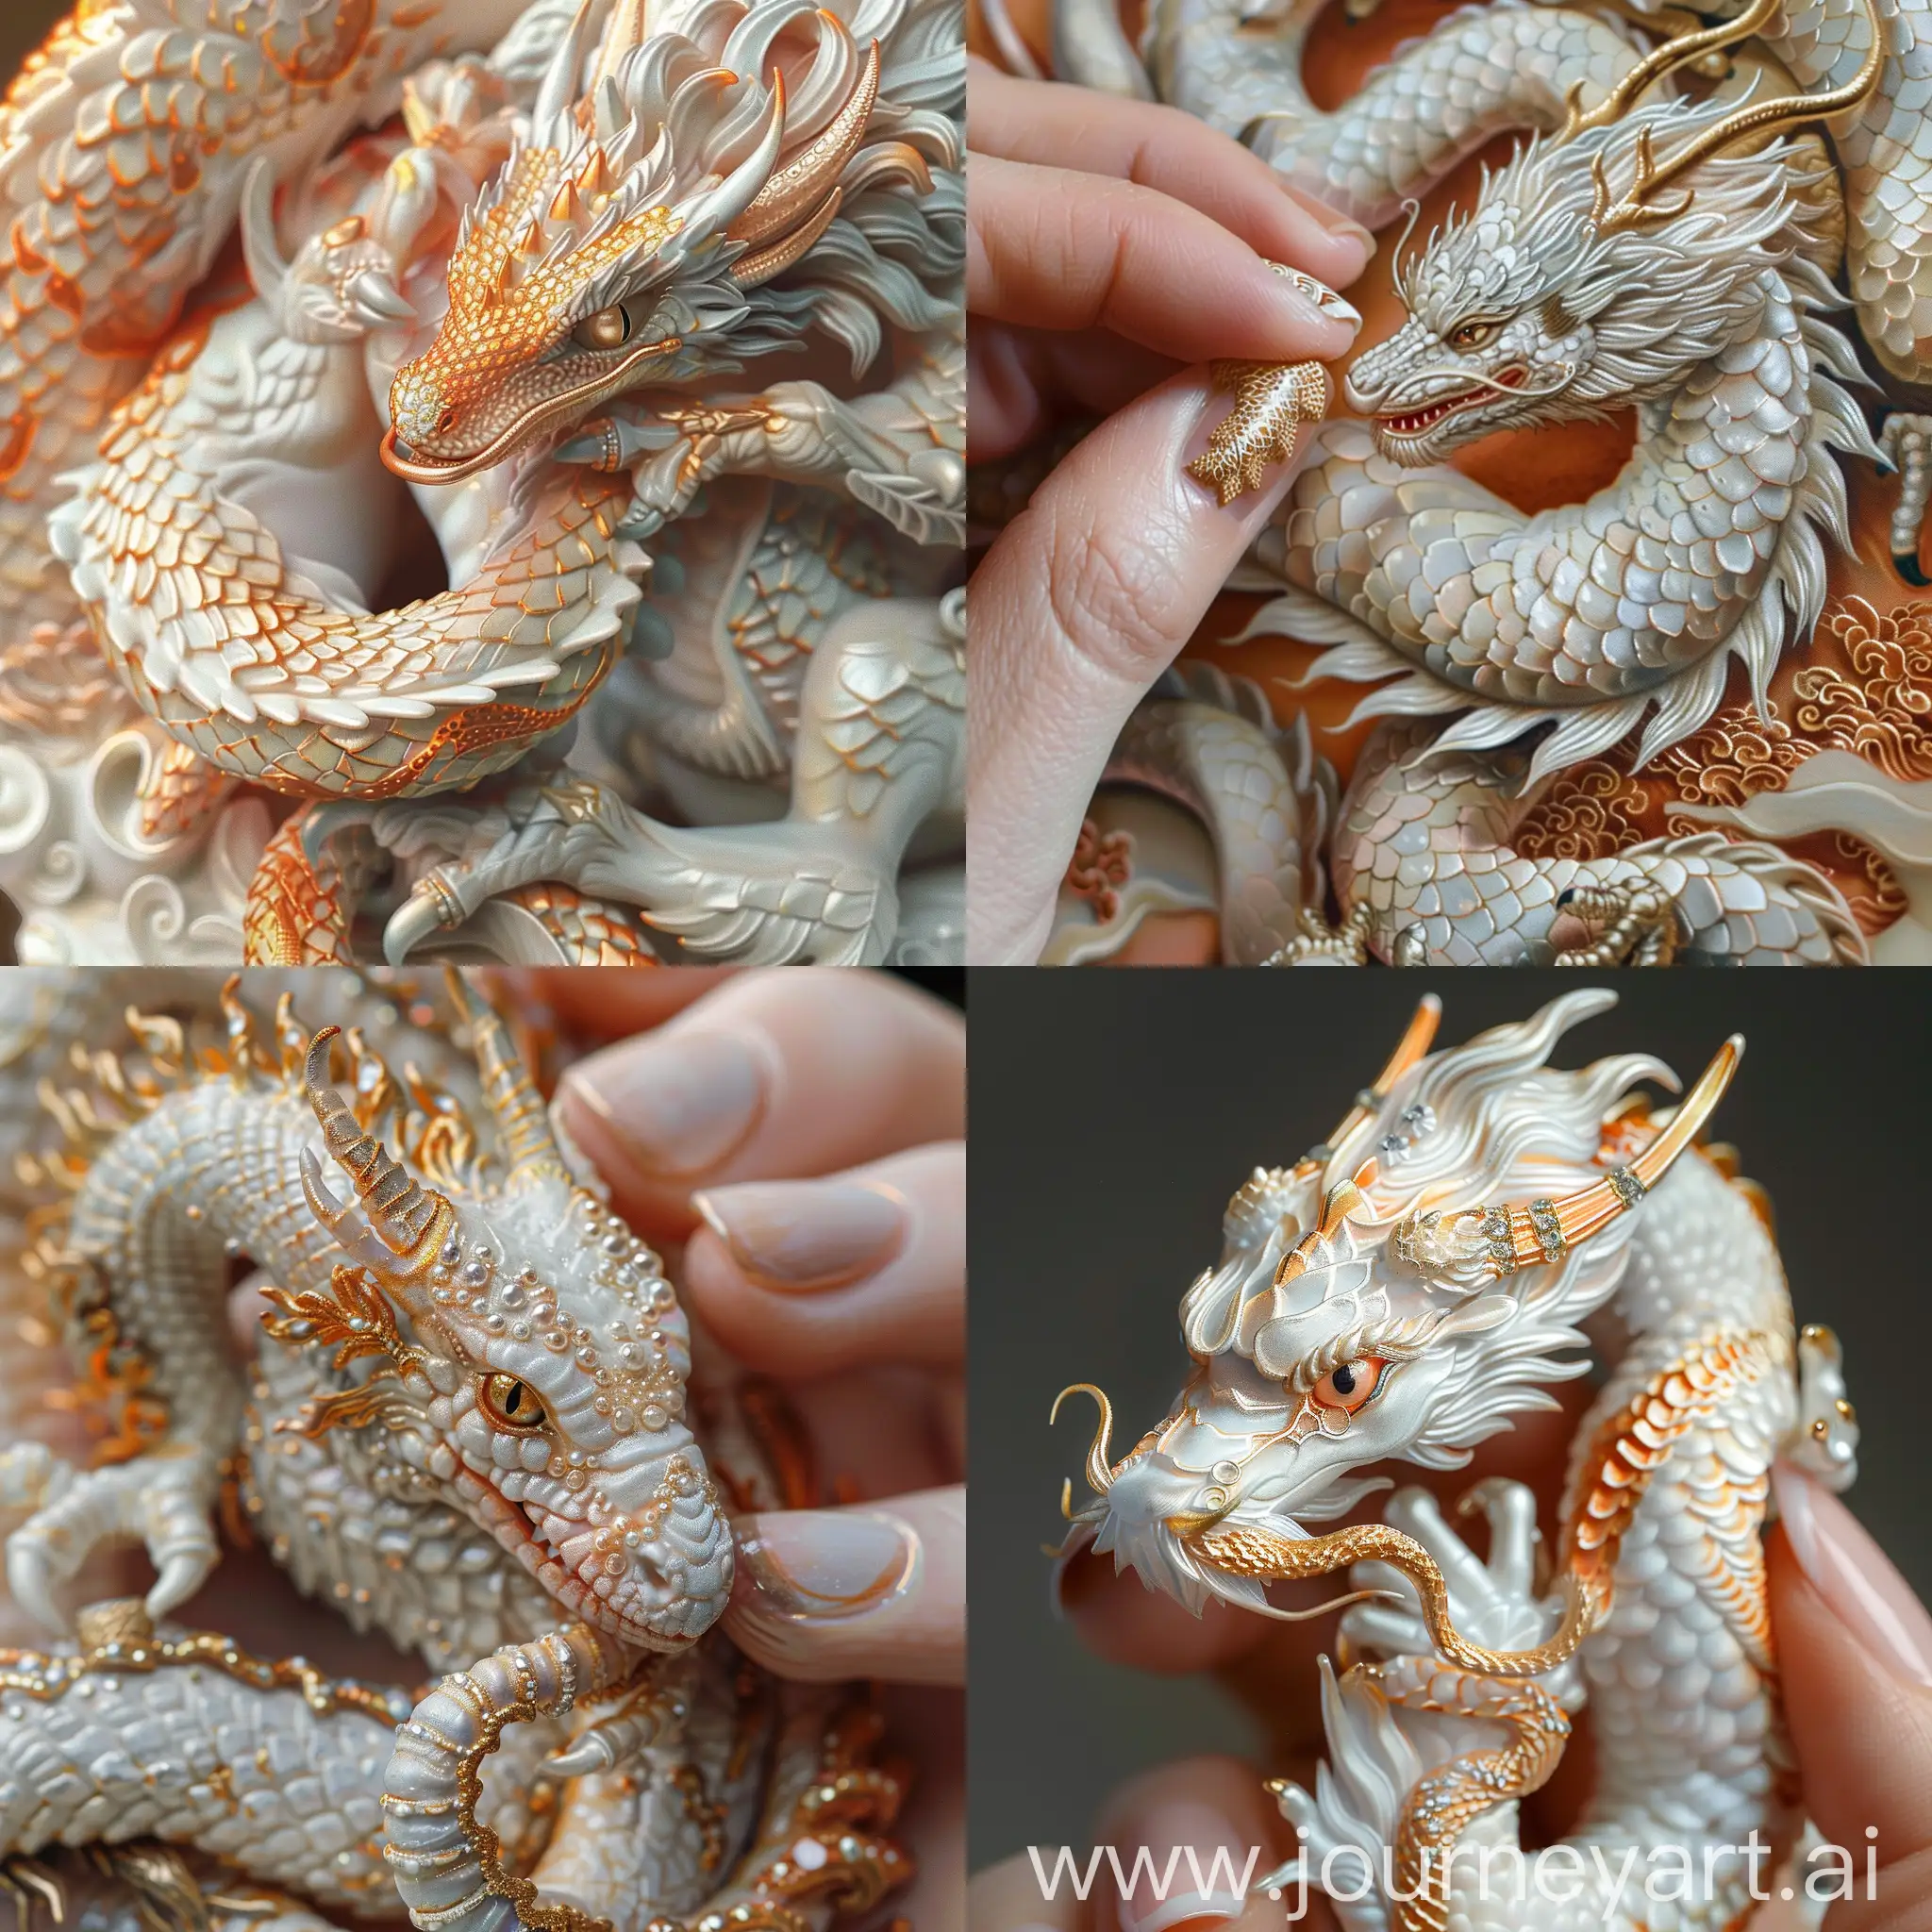 Realistic-Miniature-Dragon-with-Gold-and-Silver-Snakes